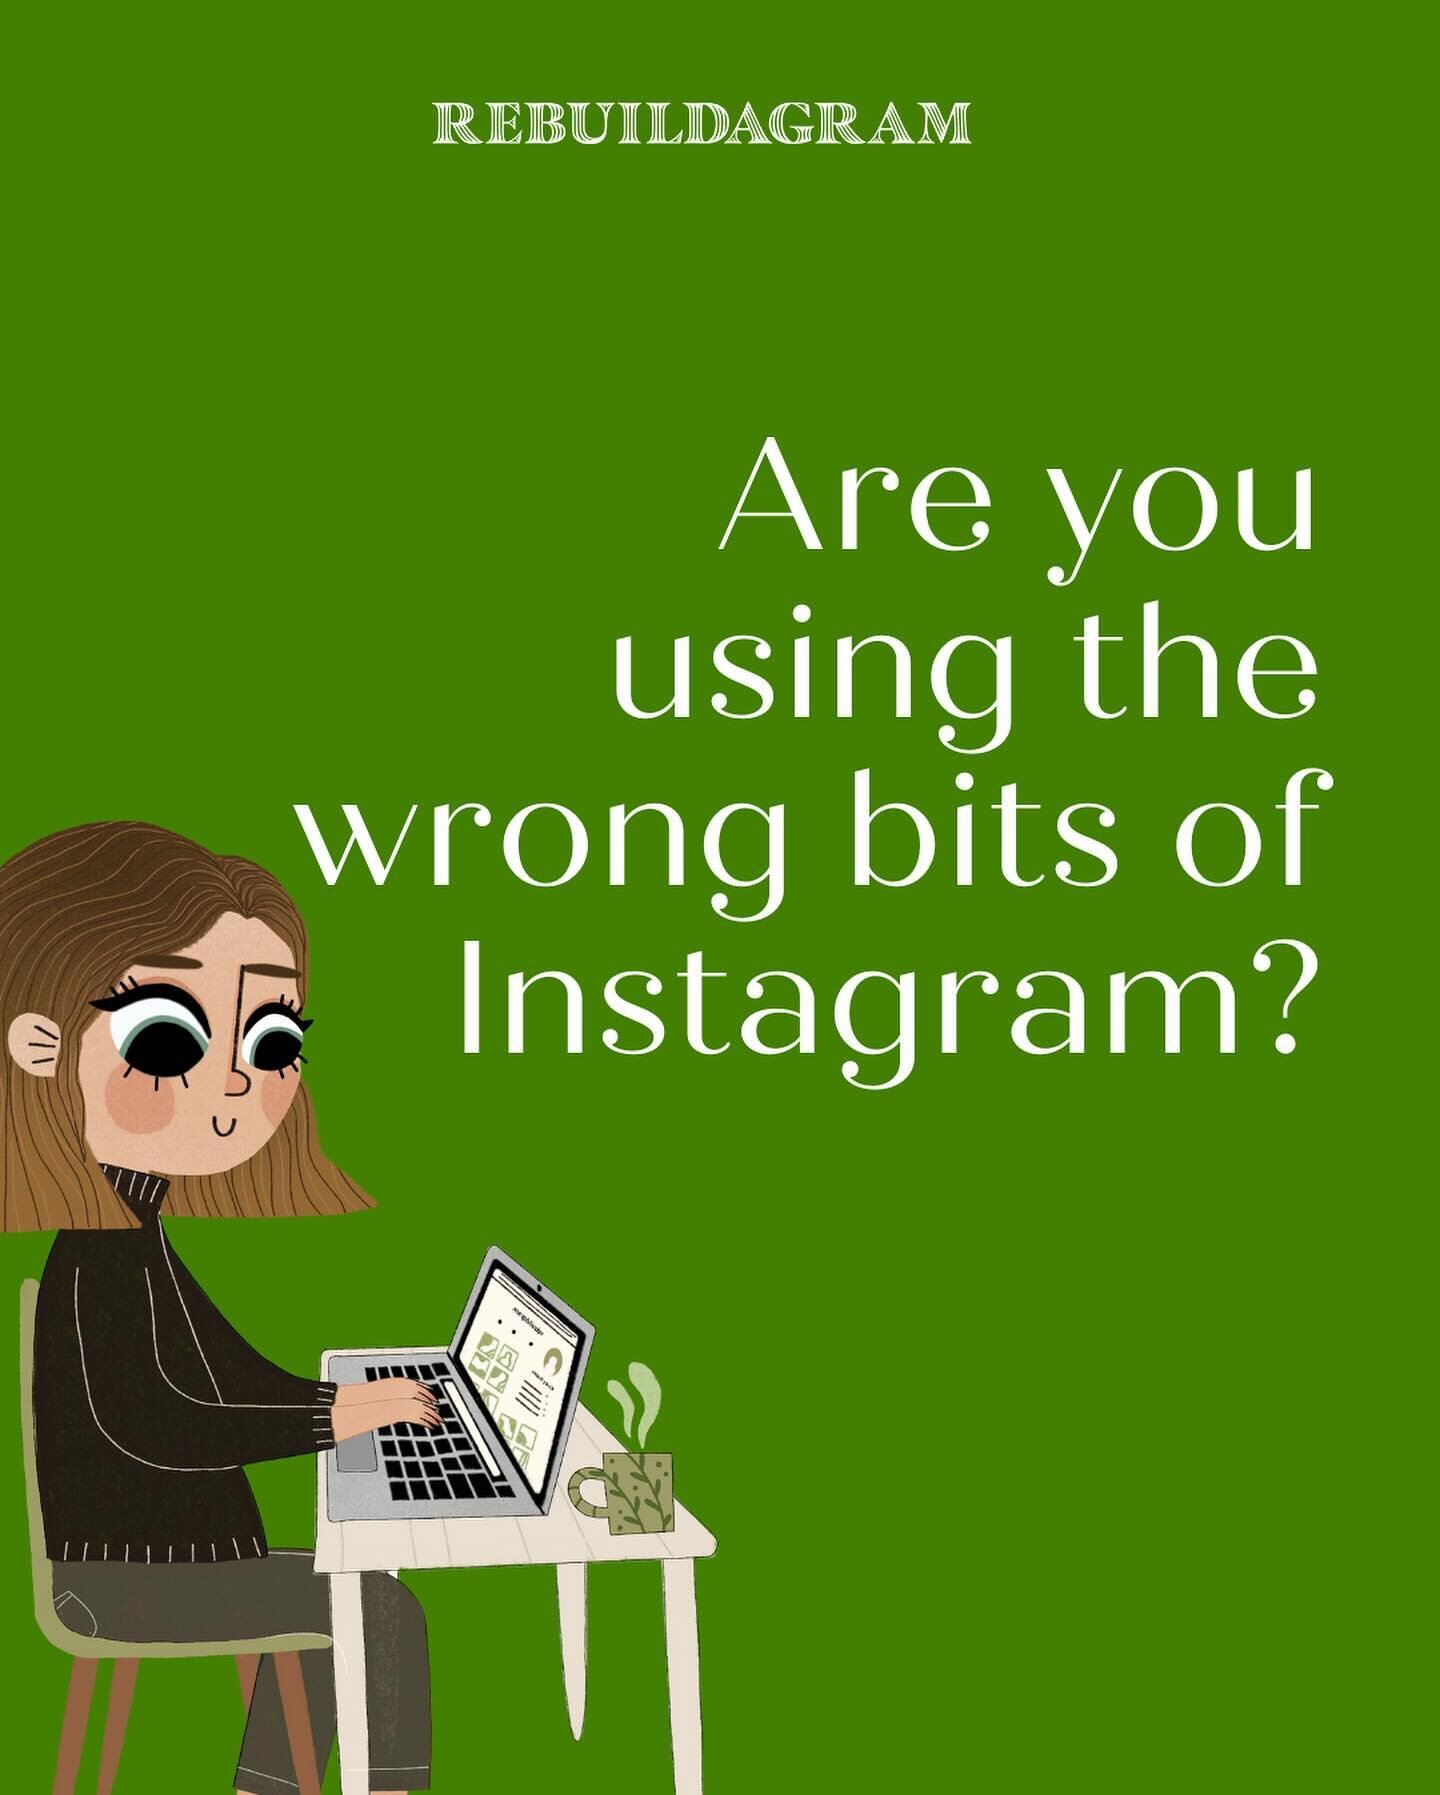 Are you concentrating on stories when you should be making reels? 😬 Never thought about going live? 🎤 Focusing on the wrong ⛔️ parts of instagram is a SUPER easy mistake to make 😕 because this platform does so much now! 

None of us have 8 hours ⏰